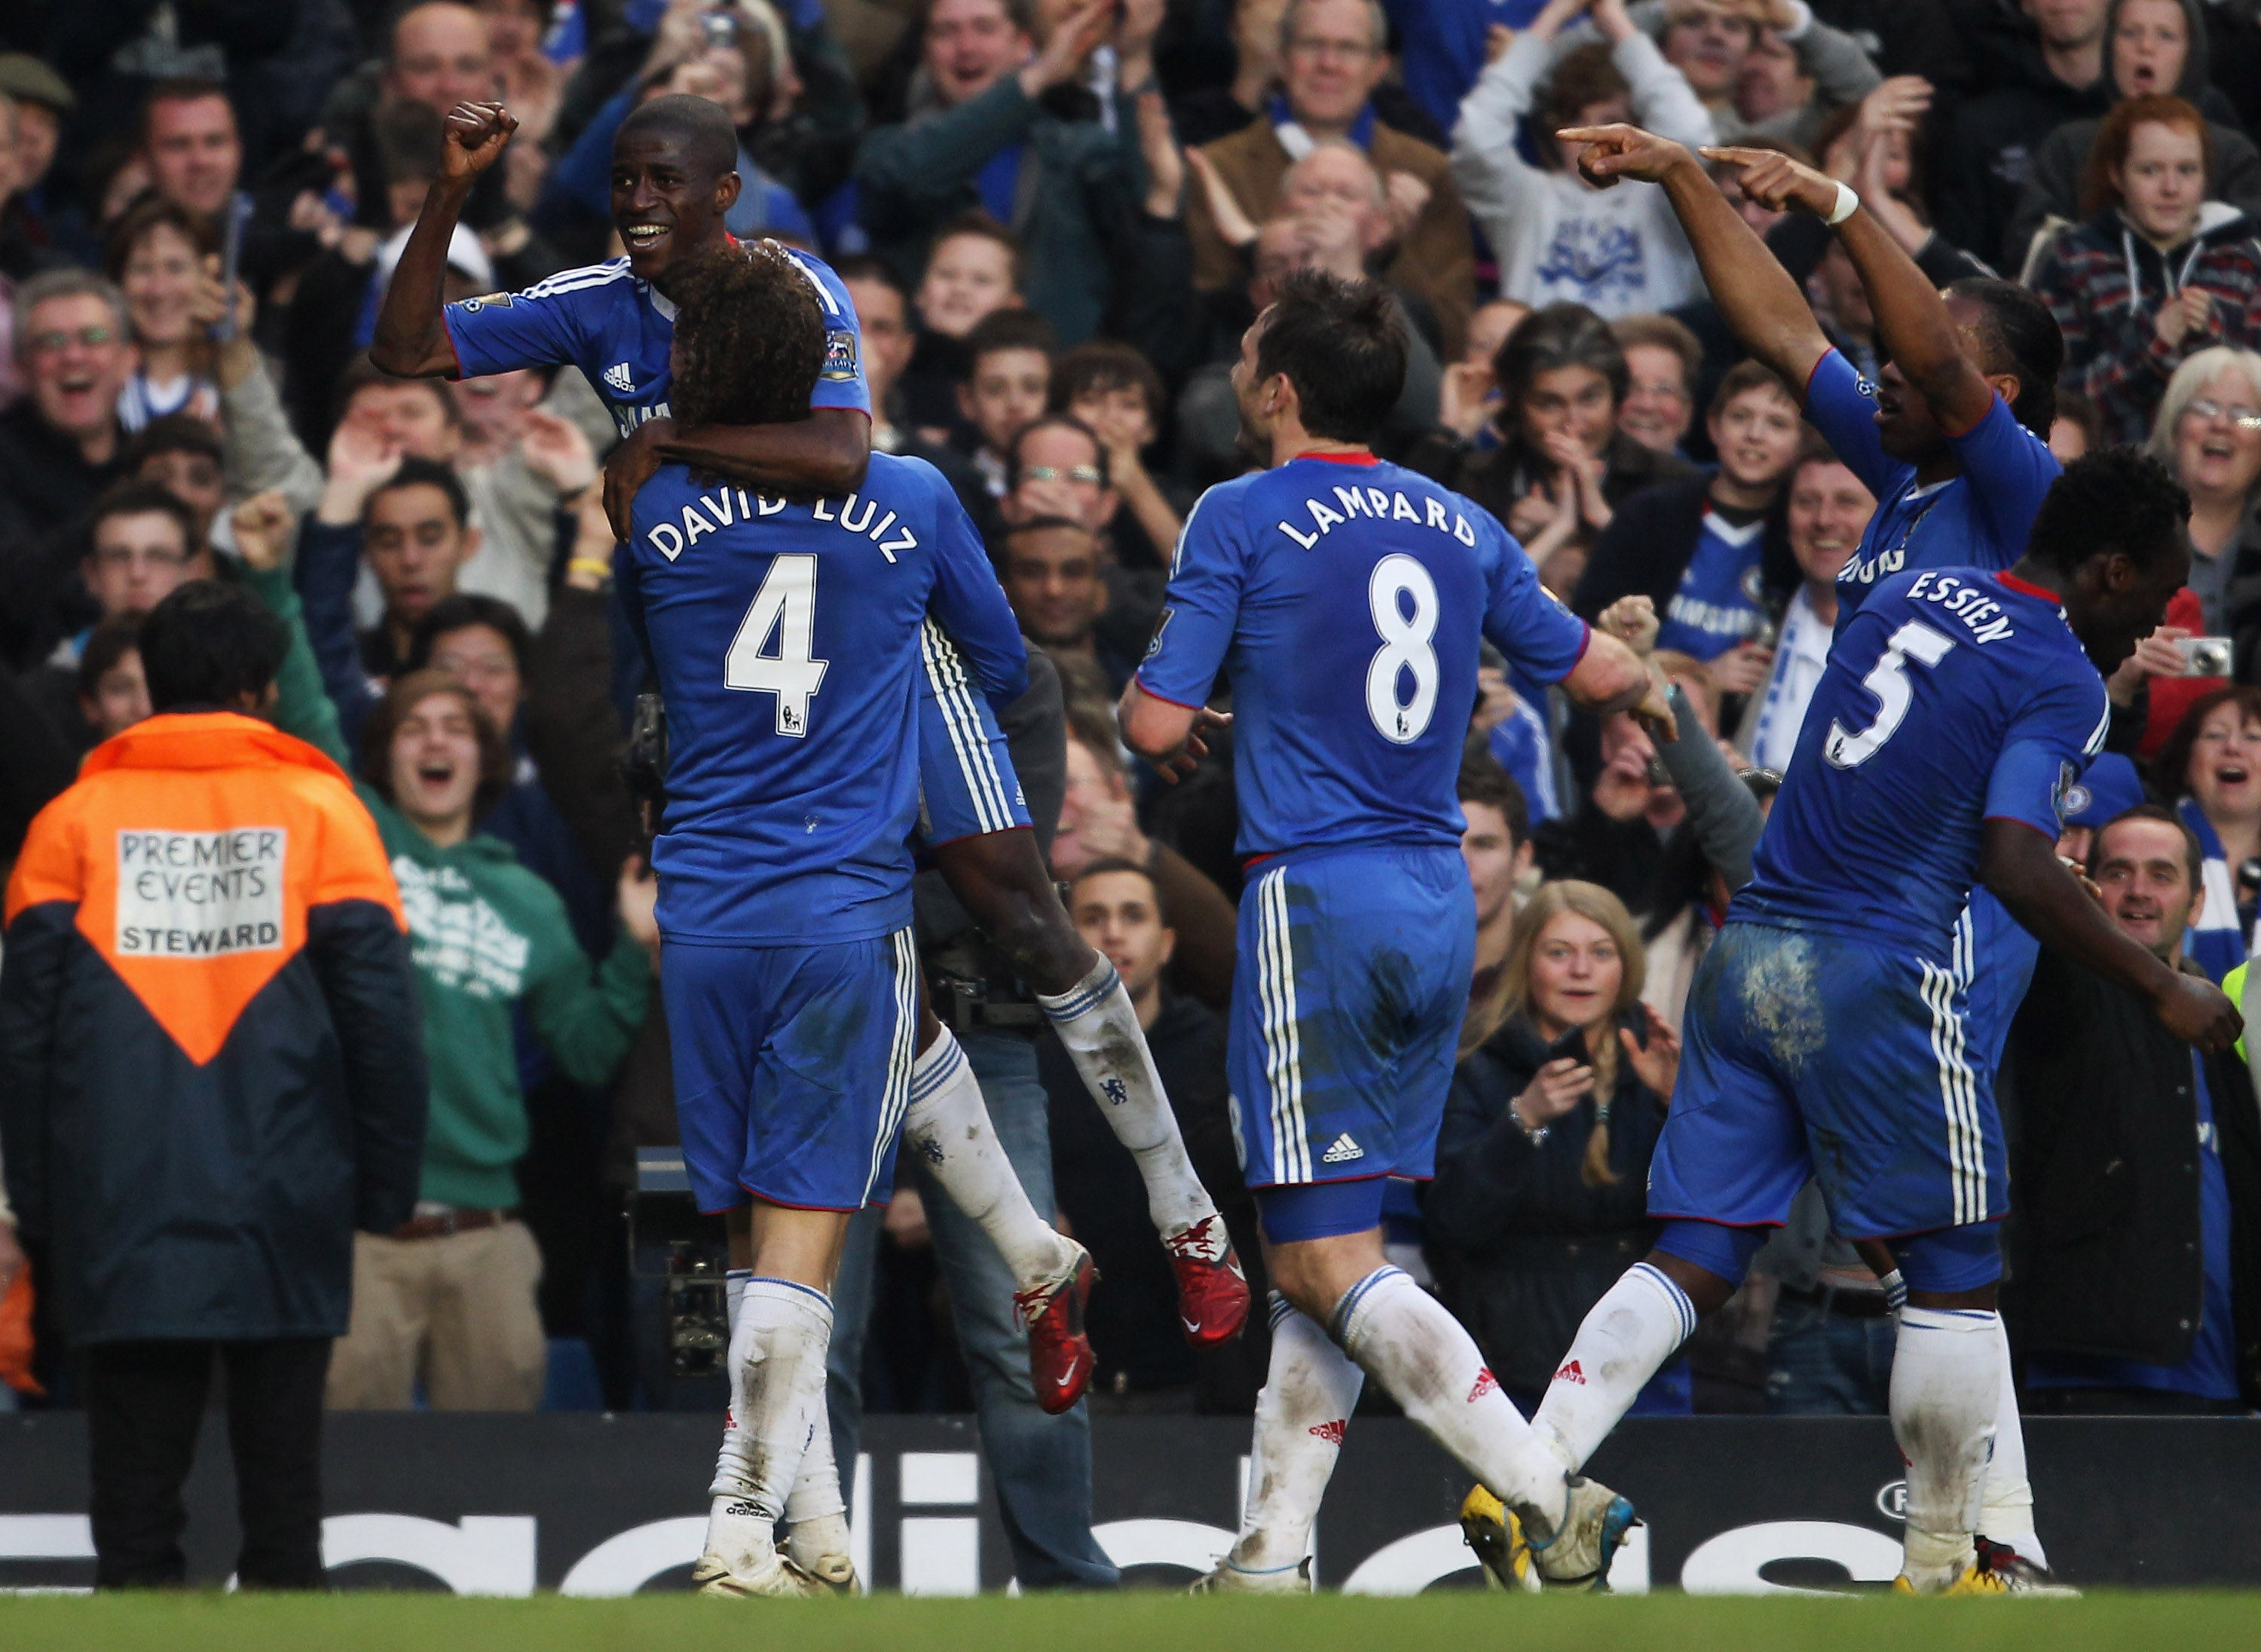 LONDON, ENGLAND - MARCH 20:  Ramires of Chelsea is lifted by David Luiz in celebration as he scores their second goal during the Barclays Premier League match between Chelsea and Manchester City at Stamford Bridge on March 20, 2011 in London, England.  (P